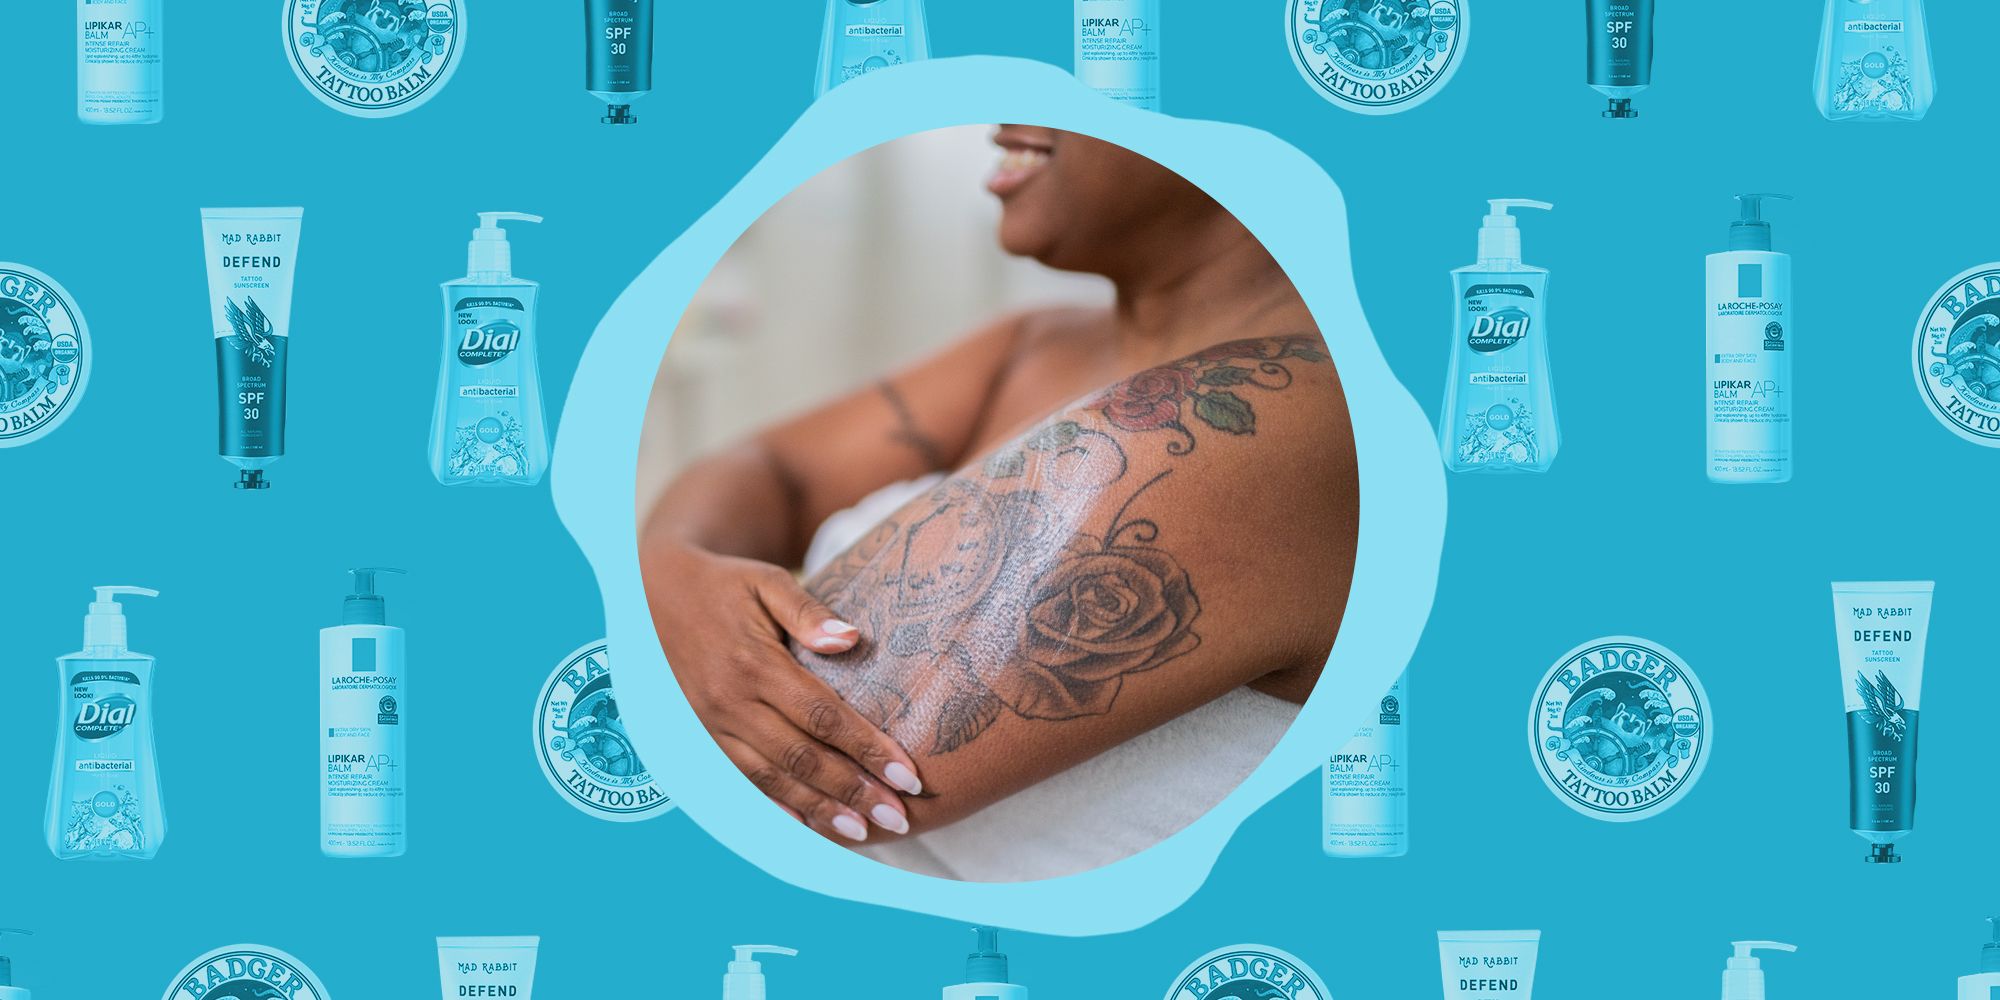 7 Best Lotion For Tattoos Options To Speed Up Healing - Tattoo Glee